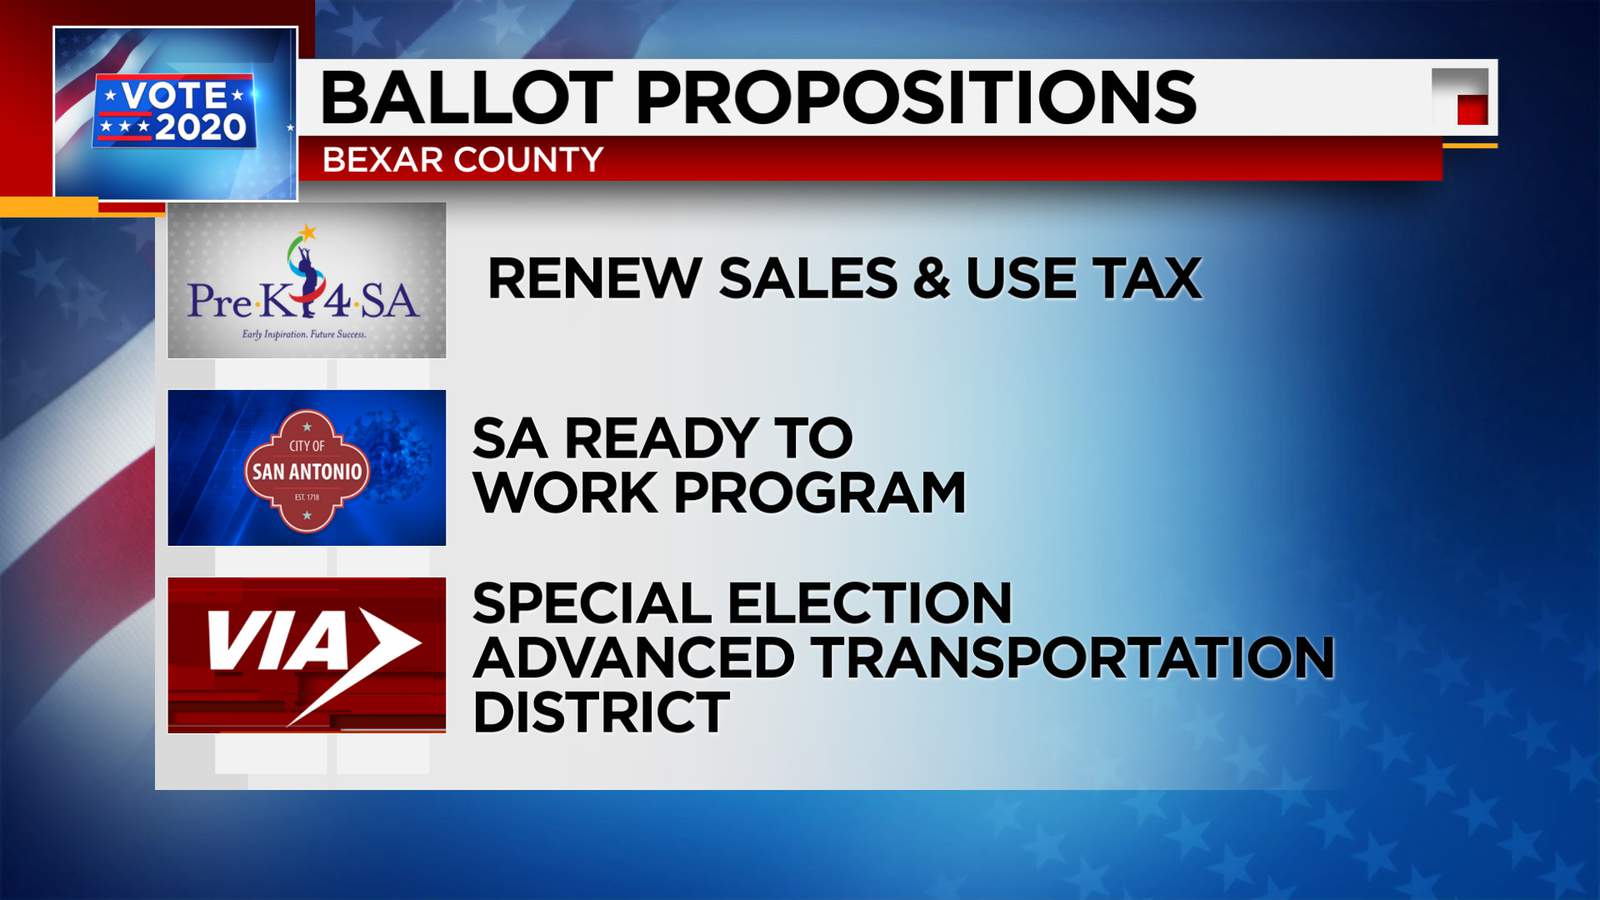 Election Results 2020: San Antonio voters approve Pre-K 4 SA, workforce training propositions and VIA transportation proposal